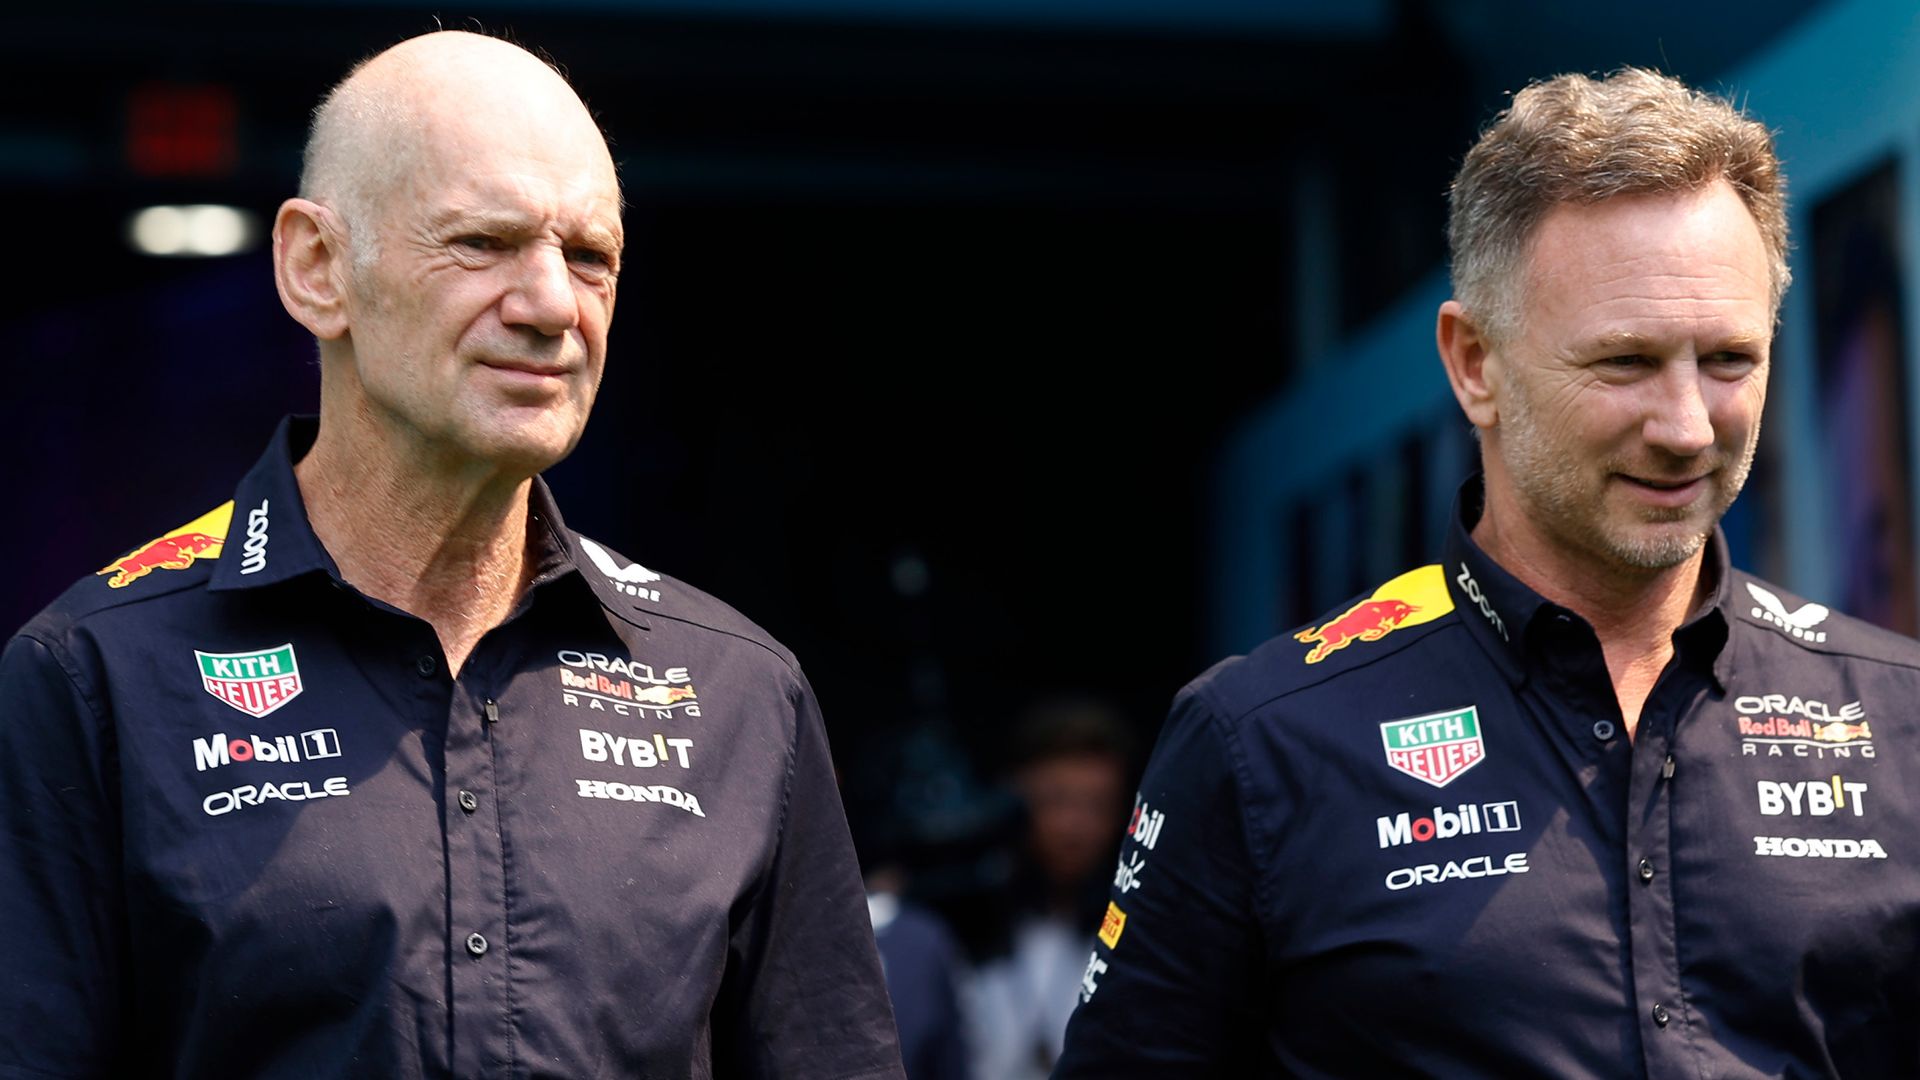 Horner: I remain friends with Newey